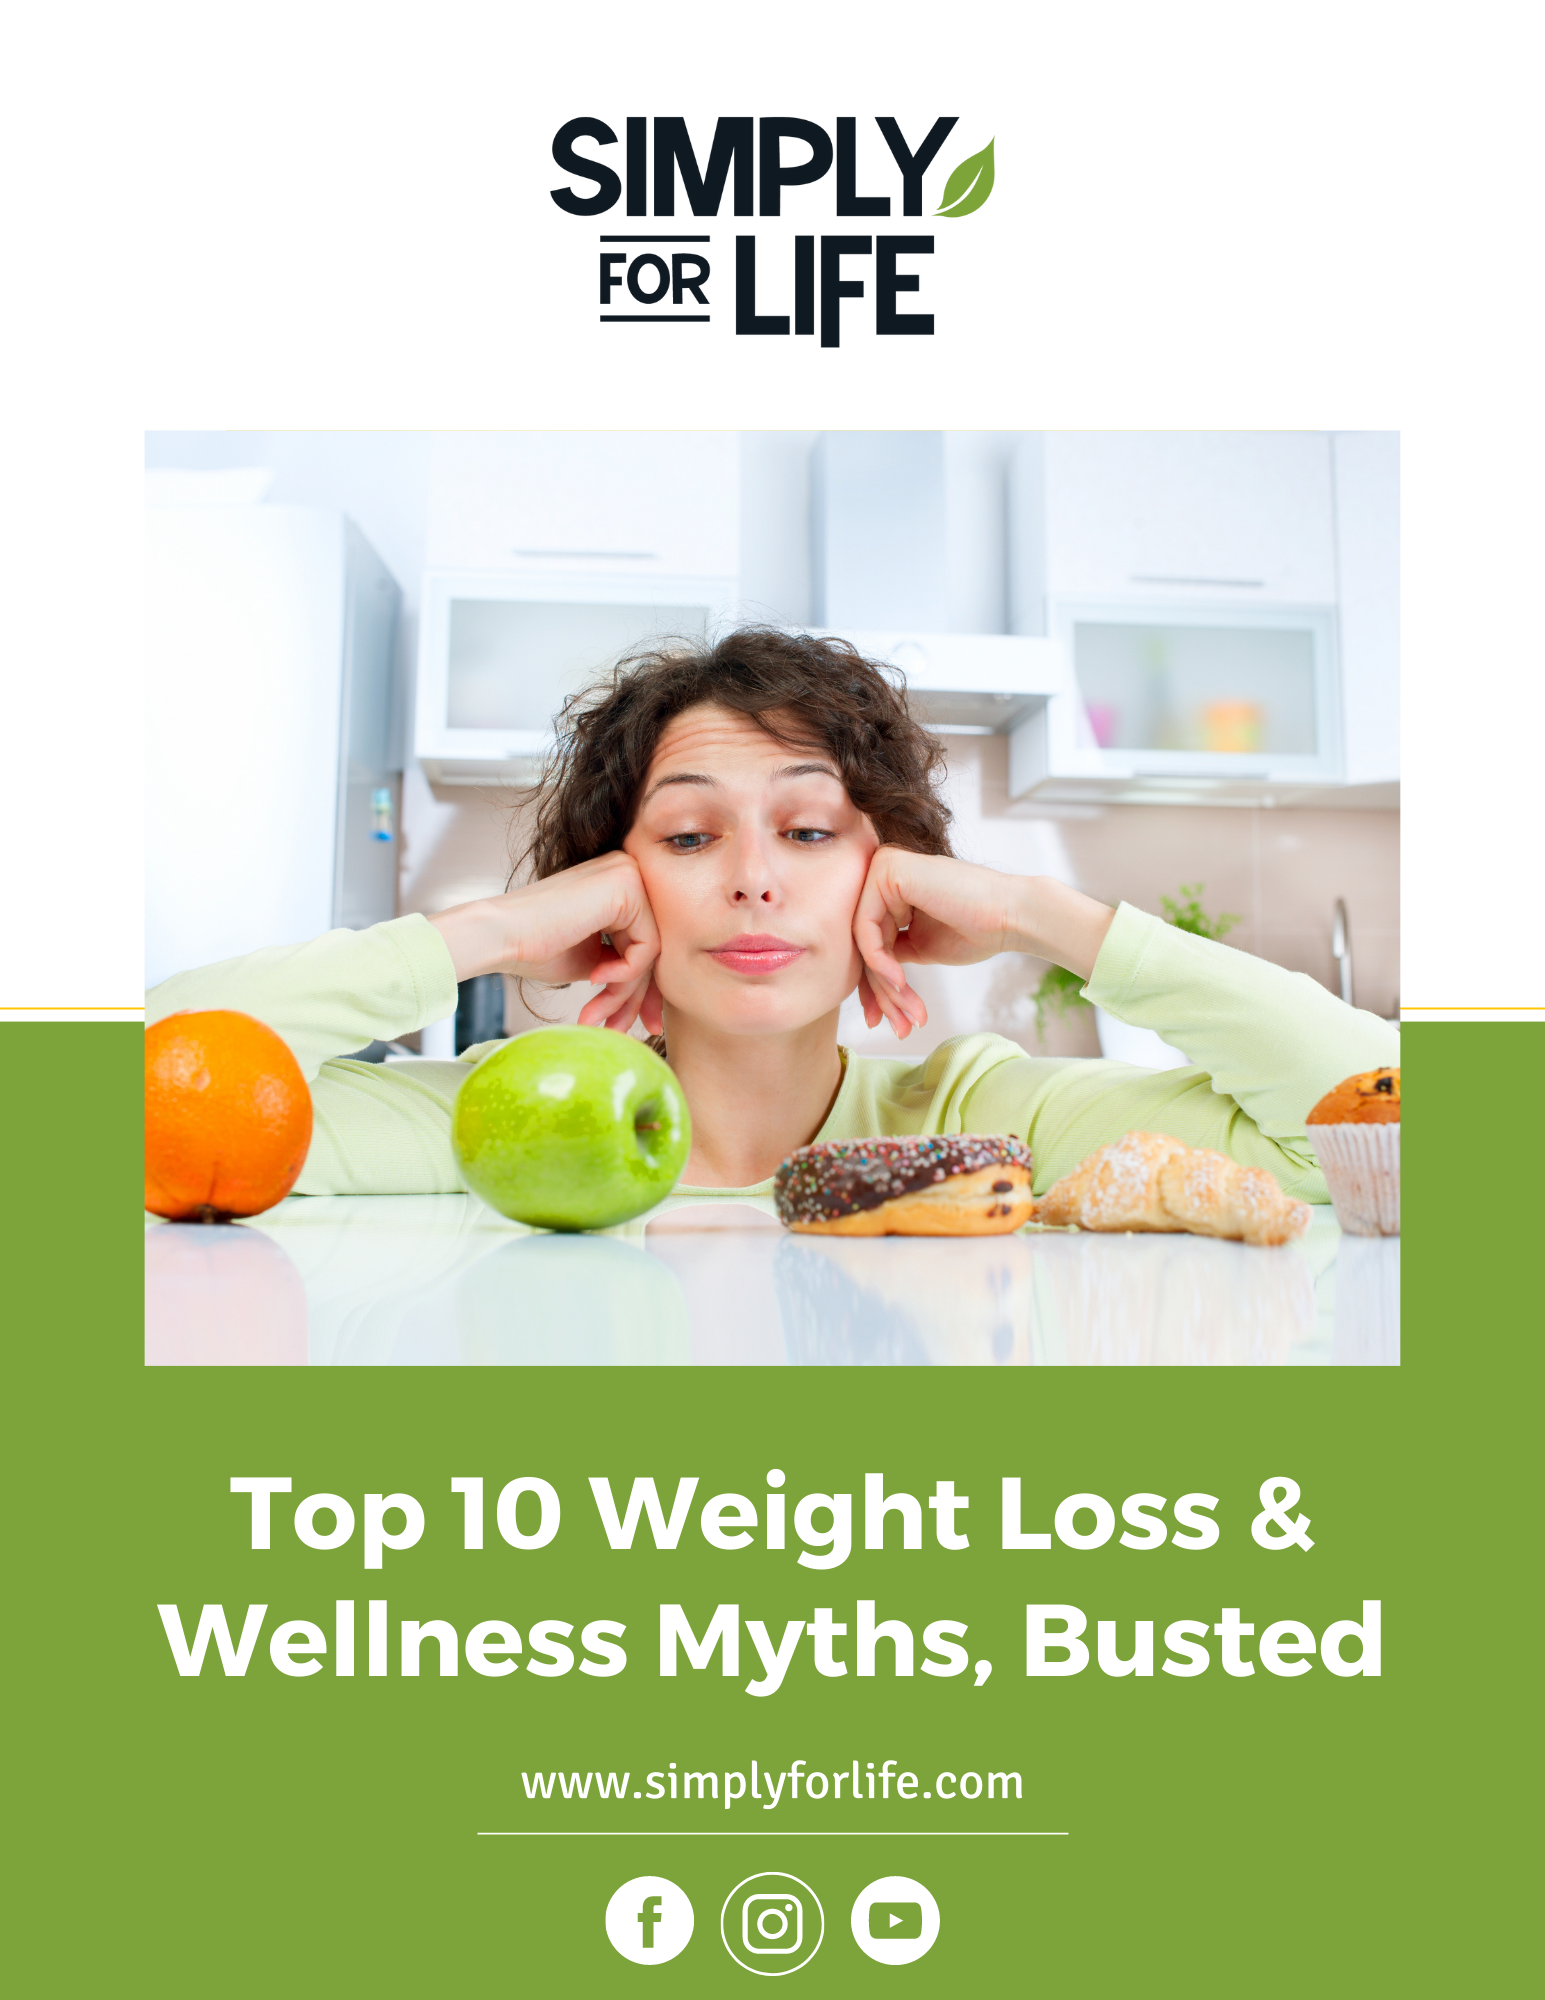 Copy of Top 10 Weight Loss & Wellness Myths, Busted